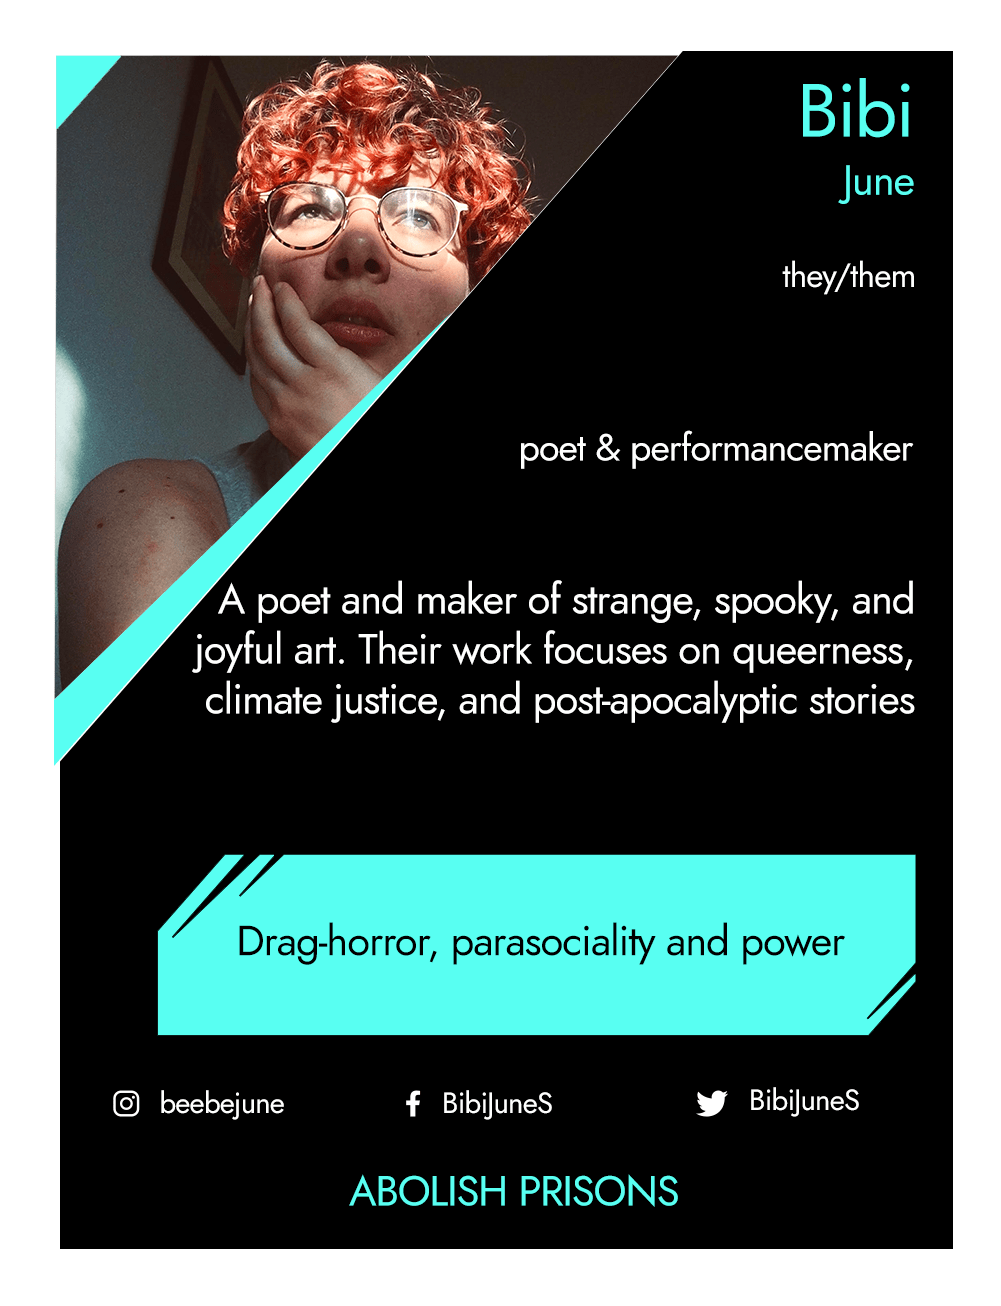 This is the front of an artist announcement card for Bibi. The design is styled on an American baseball card. The card has a thin white border and the rest of the card is black with turquoise accents. On the left hand corner, there is a triangular cross section of a photo of Bibi June, a mixed race non-binary person. Bibi is Dutch-Indonesian, with short red curly hair. They wear thin gold-framed glasses and they are looking up into the distance while they rest their head in one hand. A shaft of golden light falls across their eyes. They are wearing a white t-shirt.To the right of the photo, there is the artist's name, Bibi June, pronouns, they/them, and artistic practice, poets & performance maker. Below this is a short artist biography, which reads a poet and maker of strange, spooky and joyful art. Their work focuses on queerness, climate justice, and post-apocalyptic stories. In a turquoise rectangle below this, the card highlights what the artist’s role is within CRIPtic. For Bibi this reads drag-horror, parasociality and power. Below this are the artist’s social media handles @beebejune, @BibiJuneS, and a quote selected by the artist. This reads: Abolish prisons